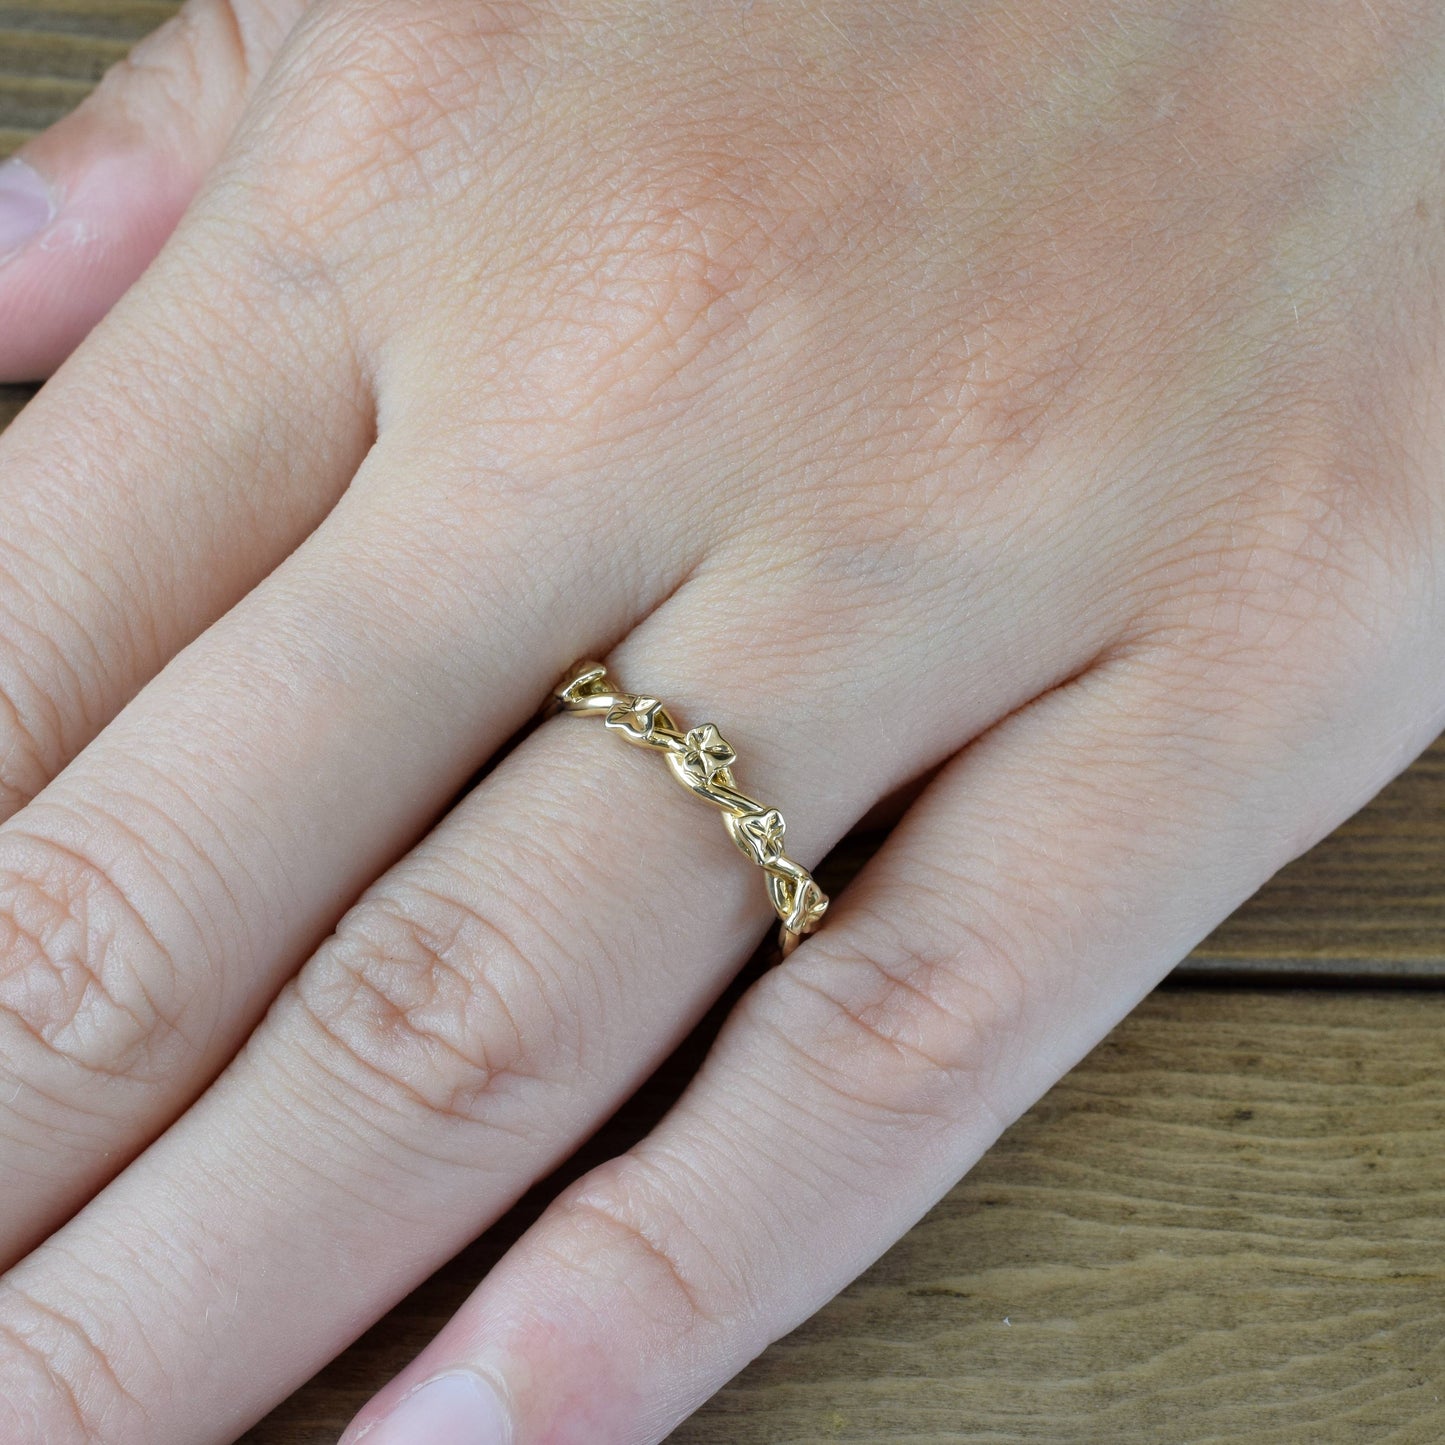 intertwined ivy ring in yellow gold on hand